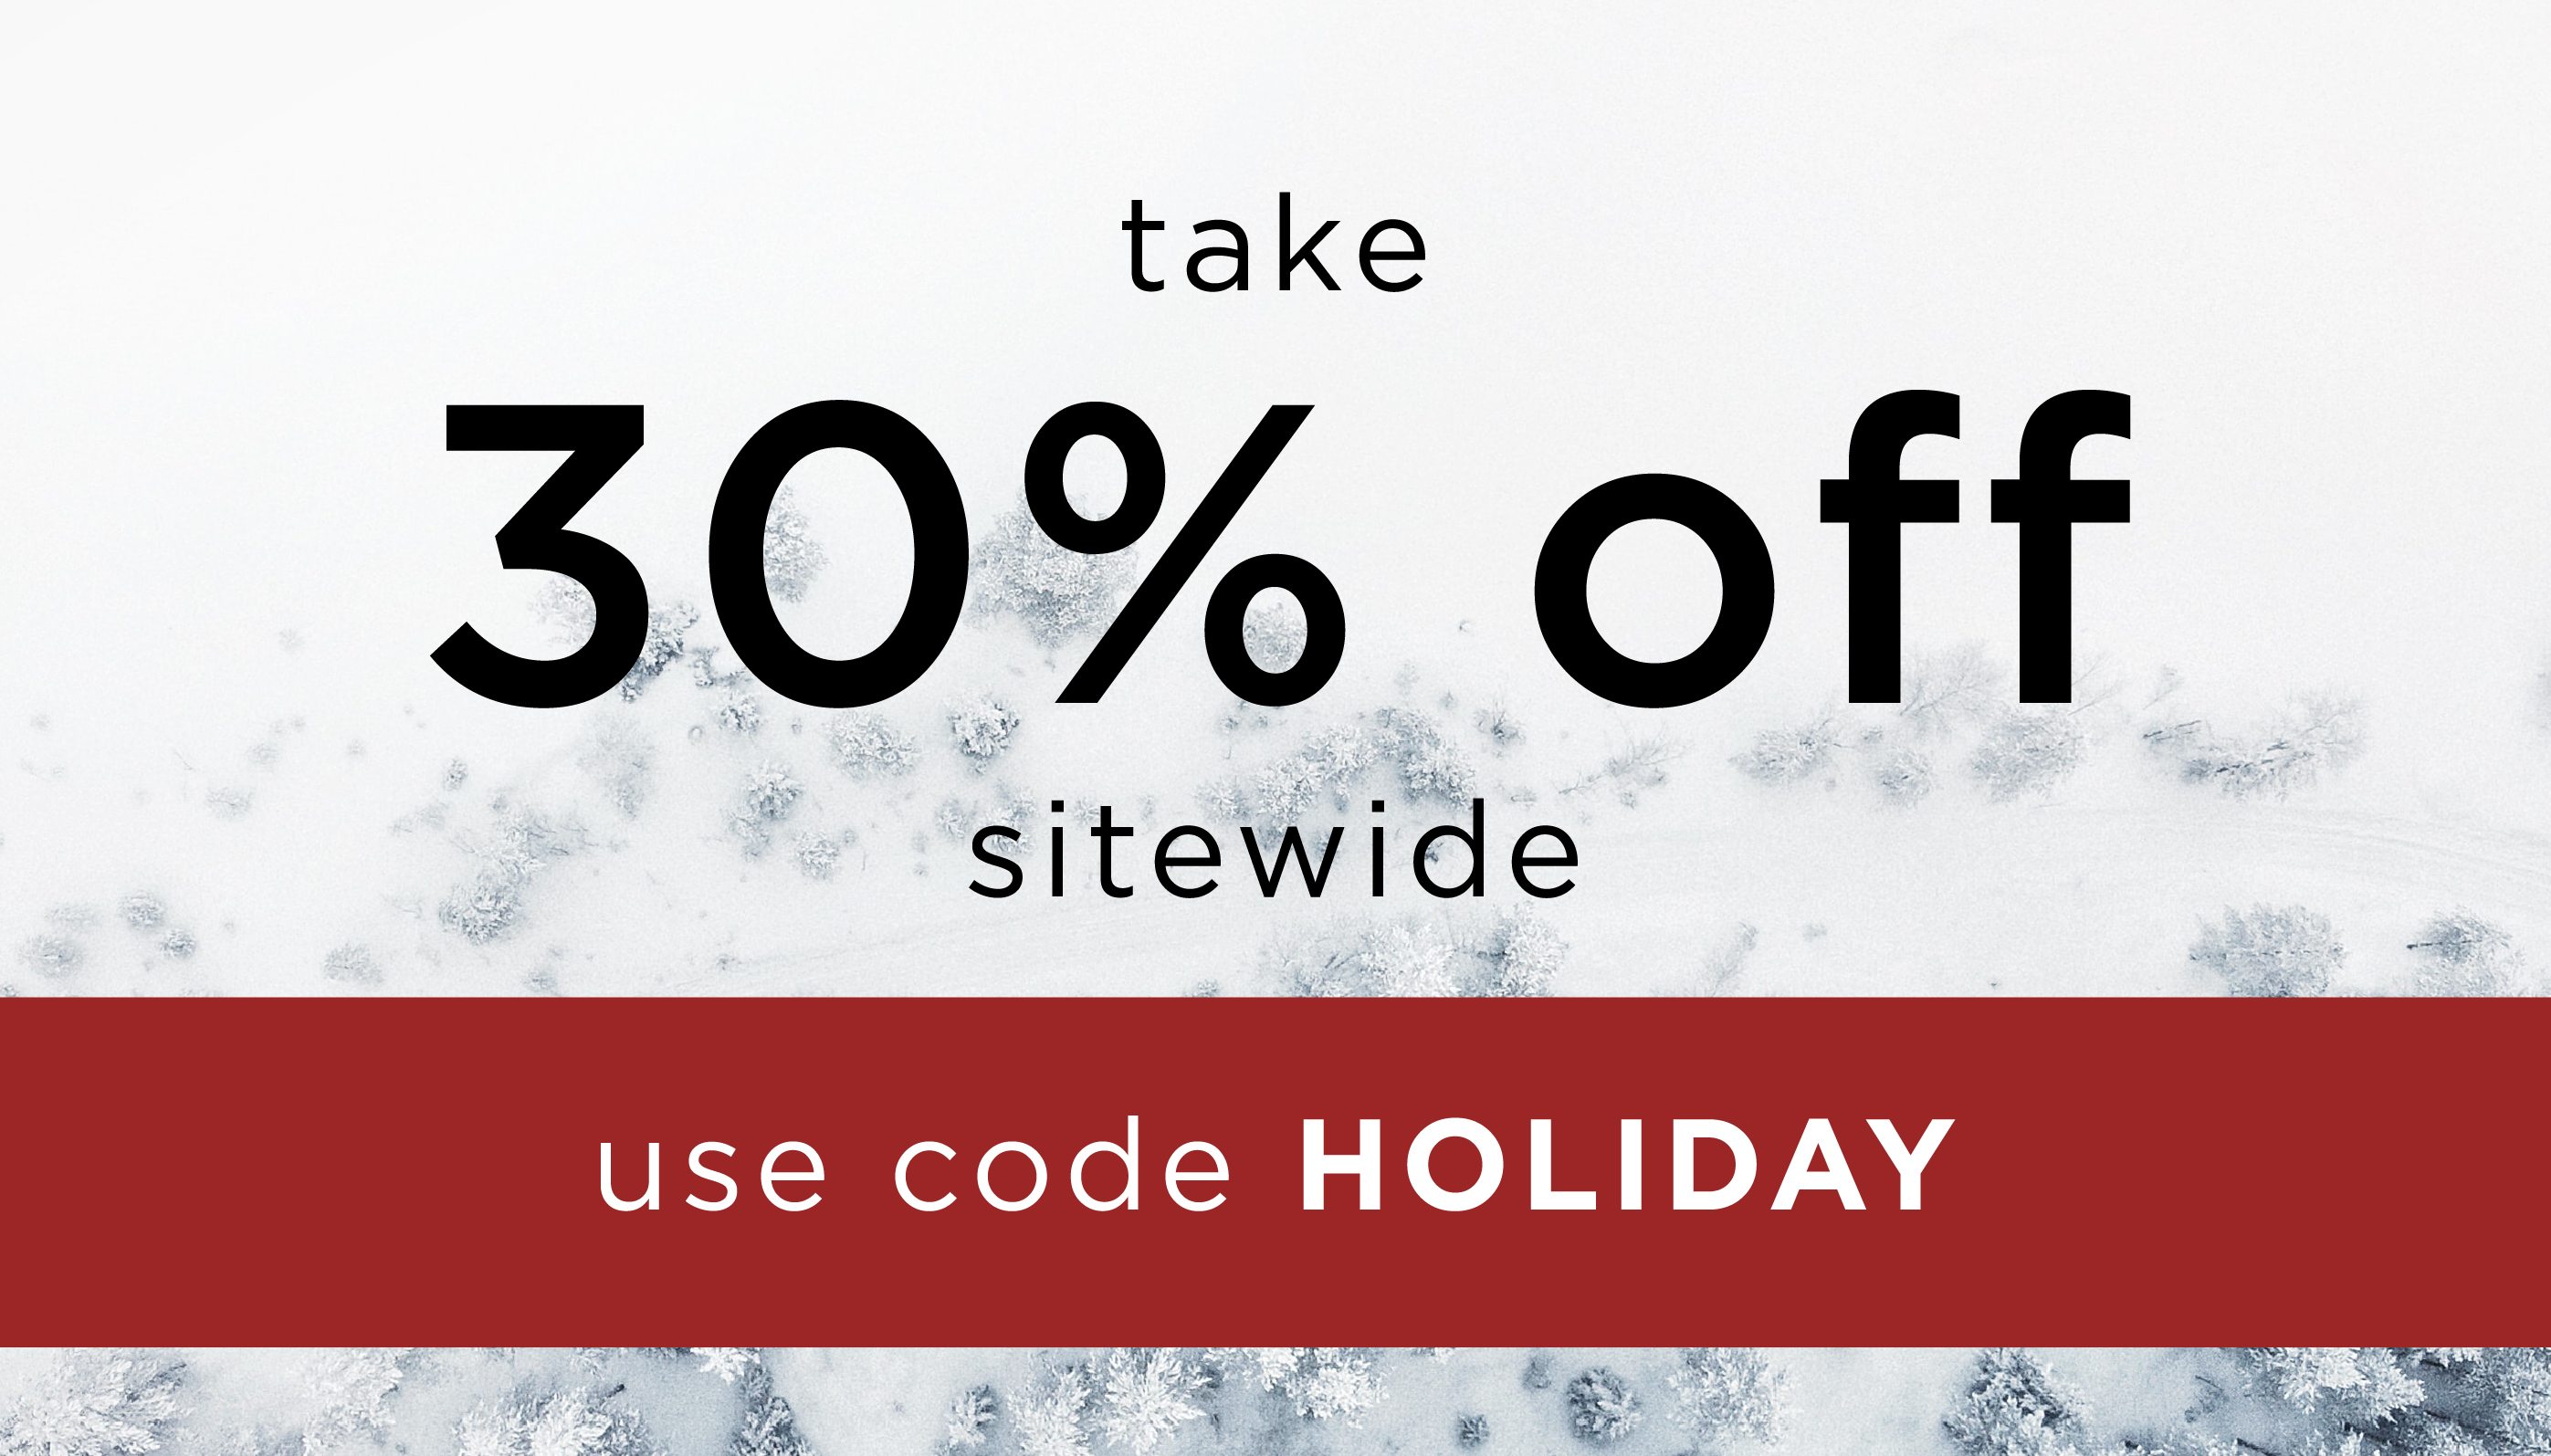 take 30% off sitewide use code HOLIDAY